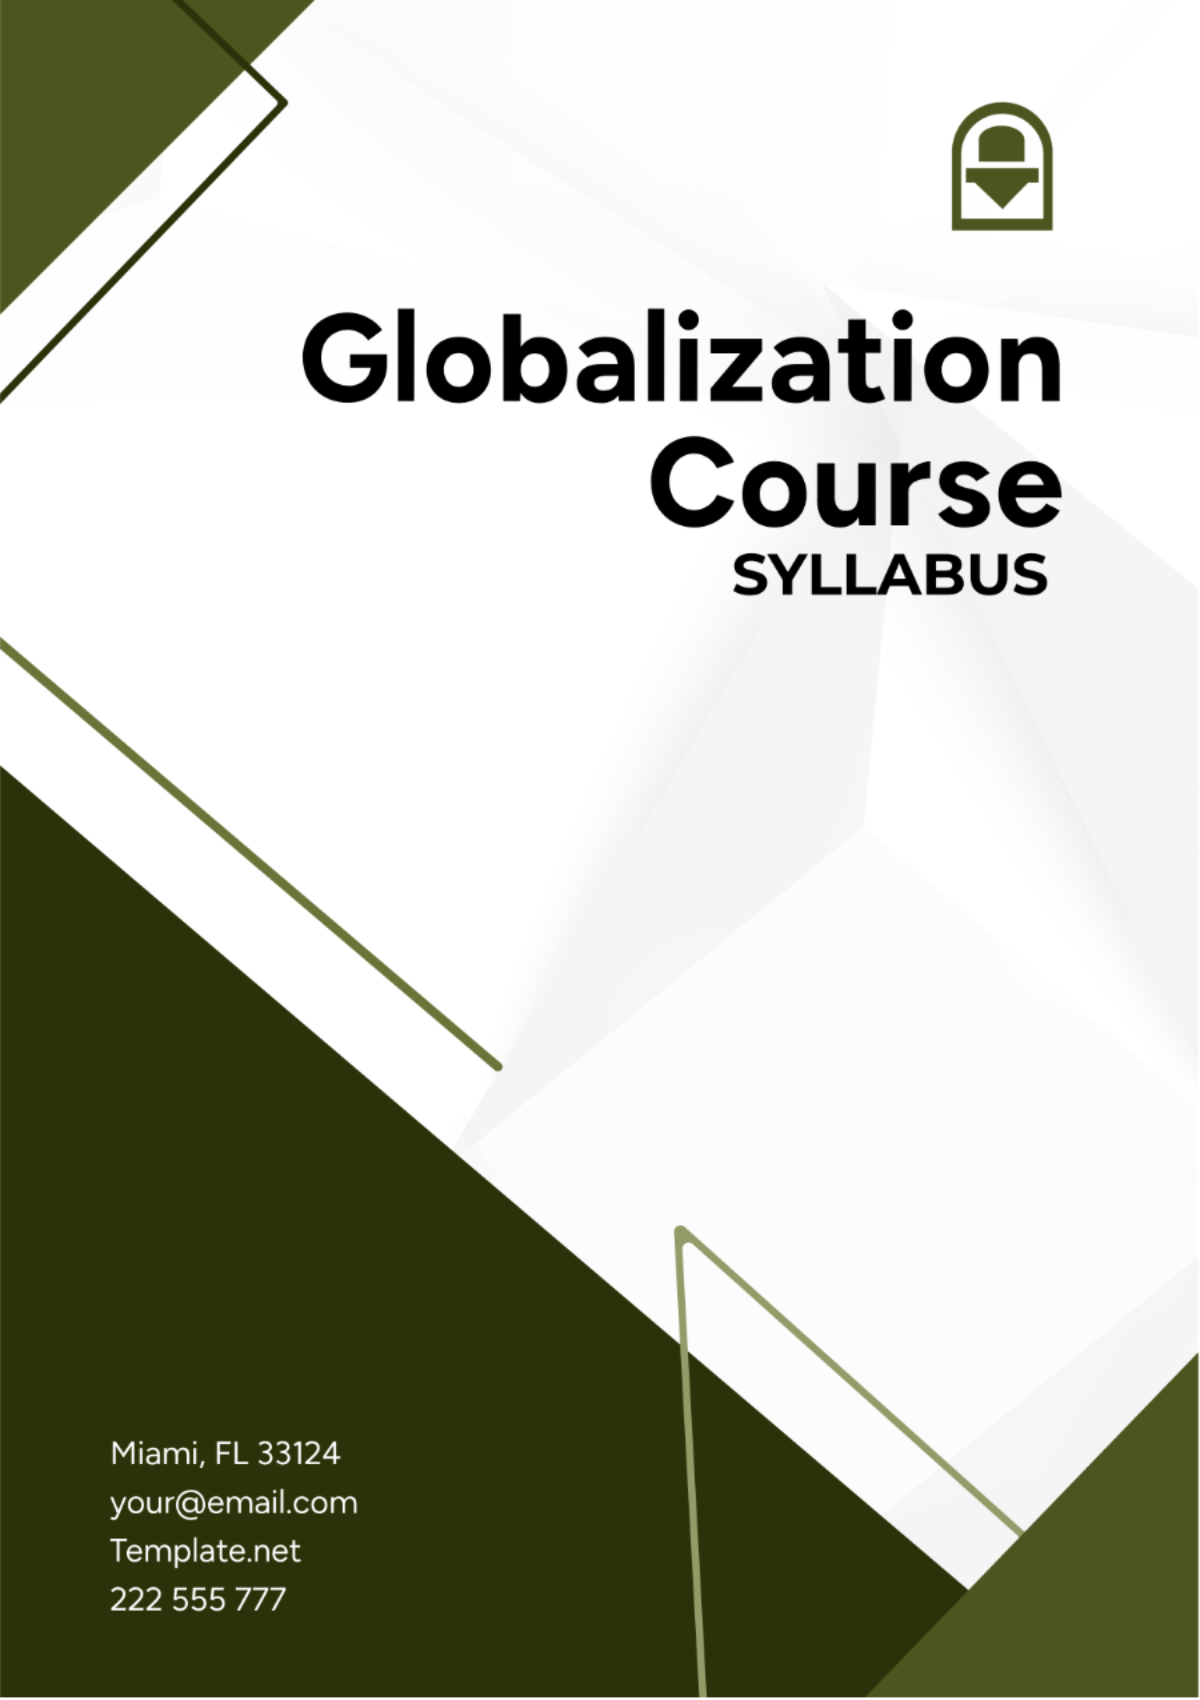 Globalization Course Syllabus Template